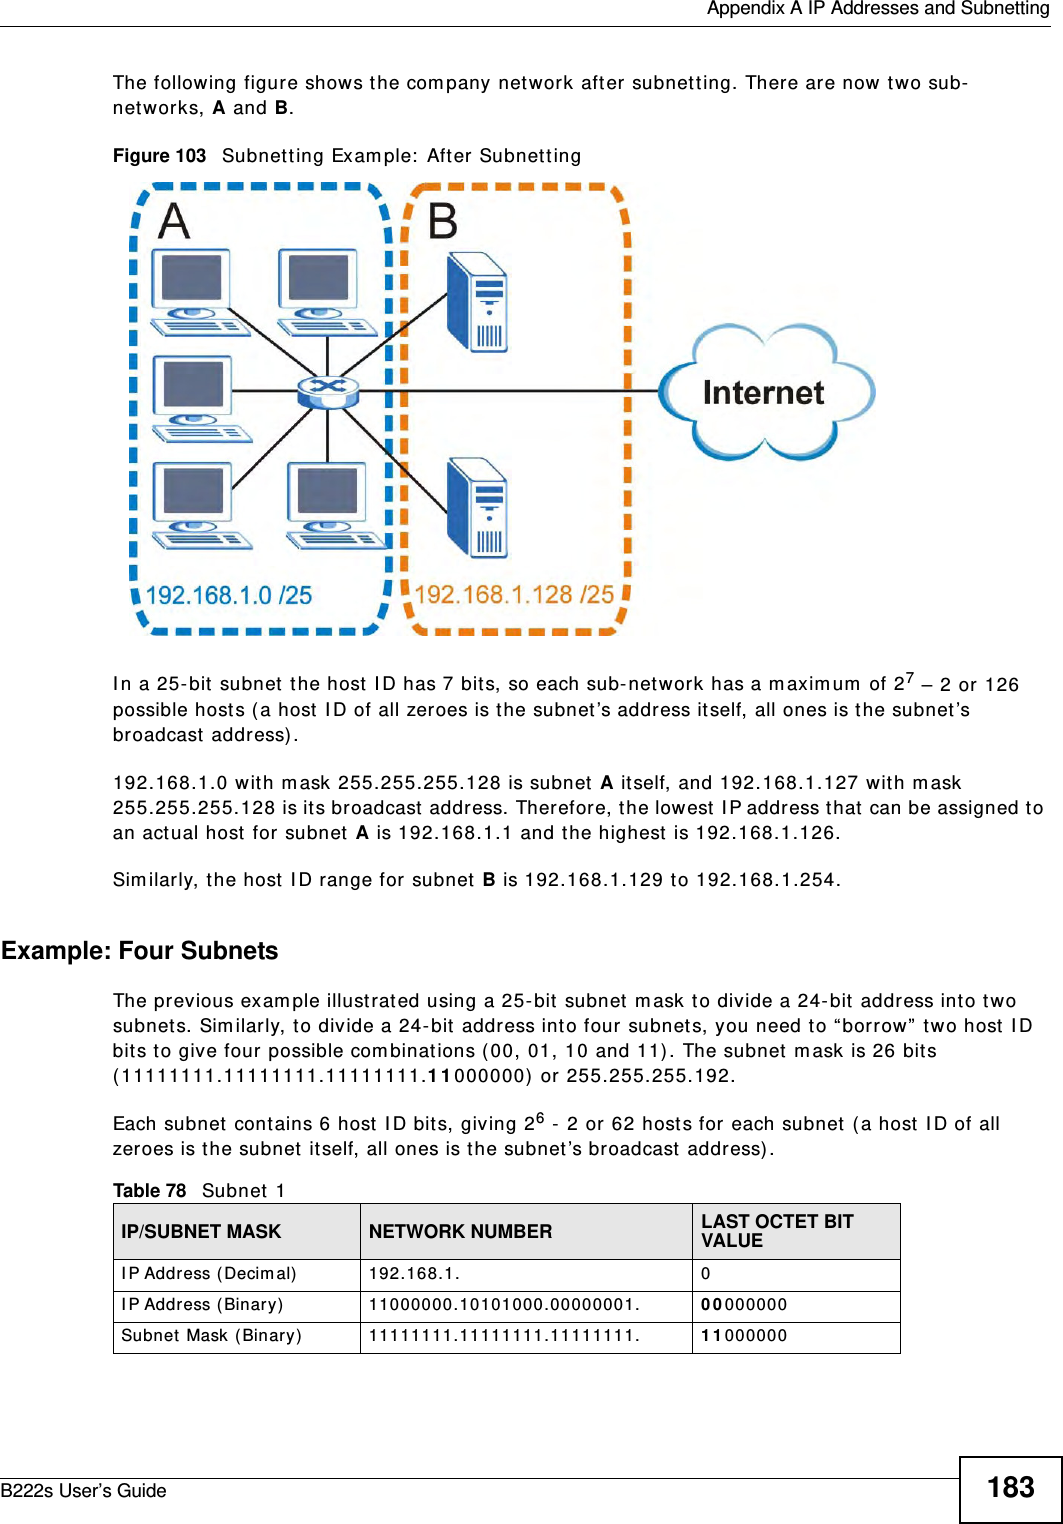  Appendix A IP Addresses and SubnettingB222s User’s Guide 183The following figure shows t he com pany network aft er subnetting. There are now t wo sub-networ ks, A and B. Figure 103   Subnet ting Exam ple:  After Subnet t ingI n a 25- bit  subnet  t he host  I D has 7 bit s, so each sub- net work has a m axim um  of 27 – 2 or 126 possible host s (a host I D of all zeroes is the subnet ’s address it self, all ones is t he subnet ’s broadcast  address) .192.168.1.0 wit h m ask 255.255.255.128 is subnet A it self, and 192.168.1.127 wit h m ask 255.255.255.128 is it s broadcast  address. Therefore, the lowest  I P address that  can be assigned t o an act ual host  for subnet  A is 192.168.1.1 and t he highest is 192.168.1.126. Sim ilarly, t he host I D range for subnet  B is 192.168.1.129 t o 192.168.1.254.Example: Four Subnets The previous exam ple illustrat ed using a 25- bit  subnet  m ask to divide a 24- bit  address int o two subnet s. Sim ilarly, t o divide a 24- bit  address int o four subnet s, you need t o “ bor row”  t wo host I D bits t o give four possible com binat ions ( 00, 01, 10 and 11) . The subnet  m ask is 26 bit s (11111111.11111111.11111111.1 1 000000)  or 255.255.255.192. Each subnet  cont ains 6 host  I D bits, giving 26 -  2 or 62 hosts for each subnet  ( a host I D of all zeroes is t he subnet  it self, all ones is t he subnet ’s broadcast  address) . Table 78   Subnet 1IP/SUBNET MASK NETWORK NUMBER LAST OCTET BIT VALUEI P Address ( Decim al) 192.168.1. 0I P Address ( Binary) 11000000.10101000.00000001. 0 0 000000Subnet Mask ( Binary) 11111111.11111111.11111111. 1 1 000000